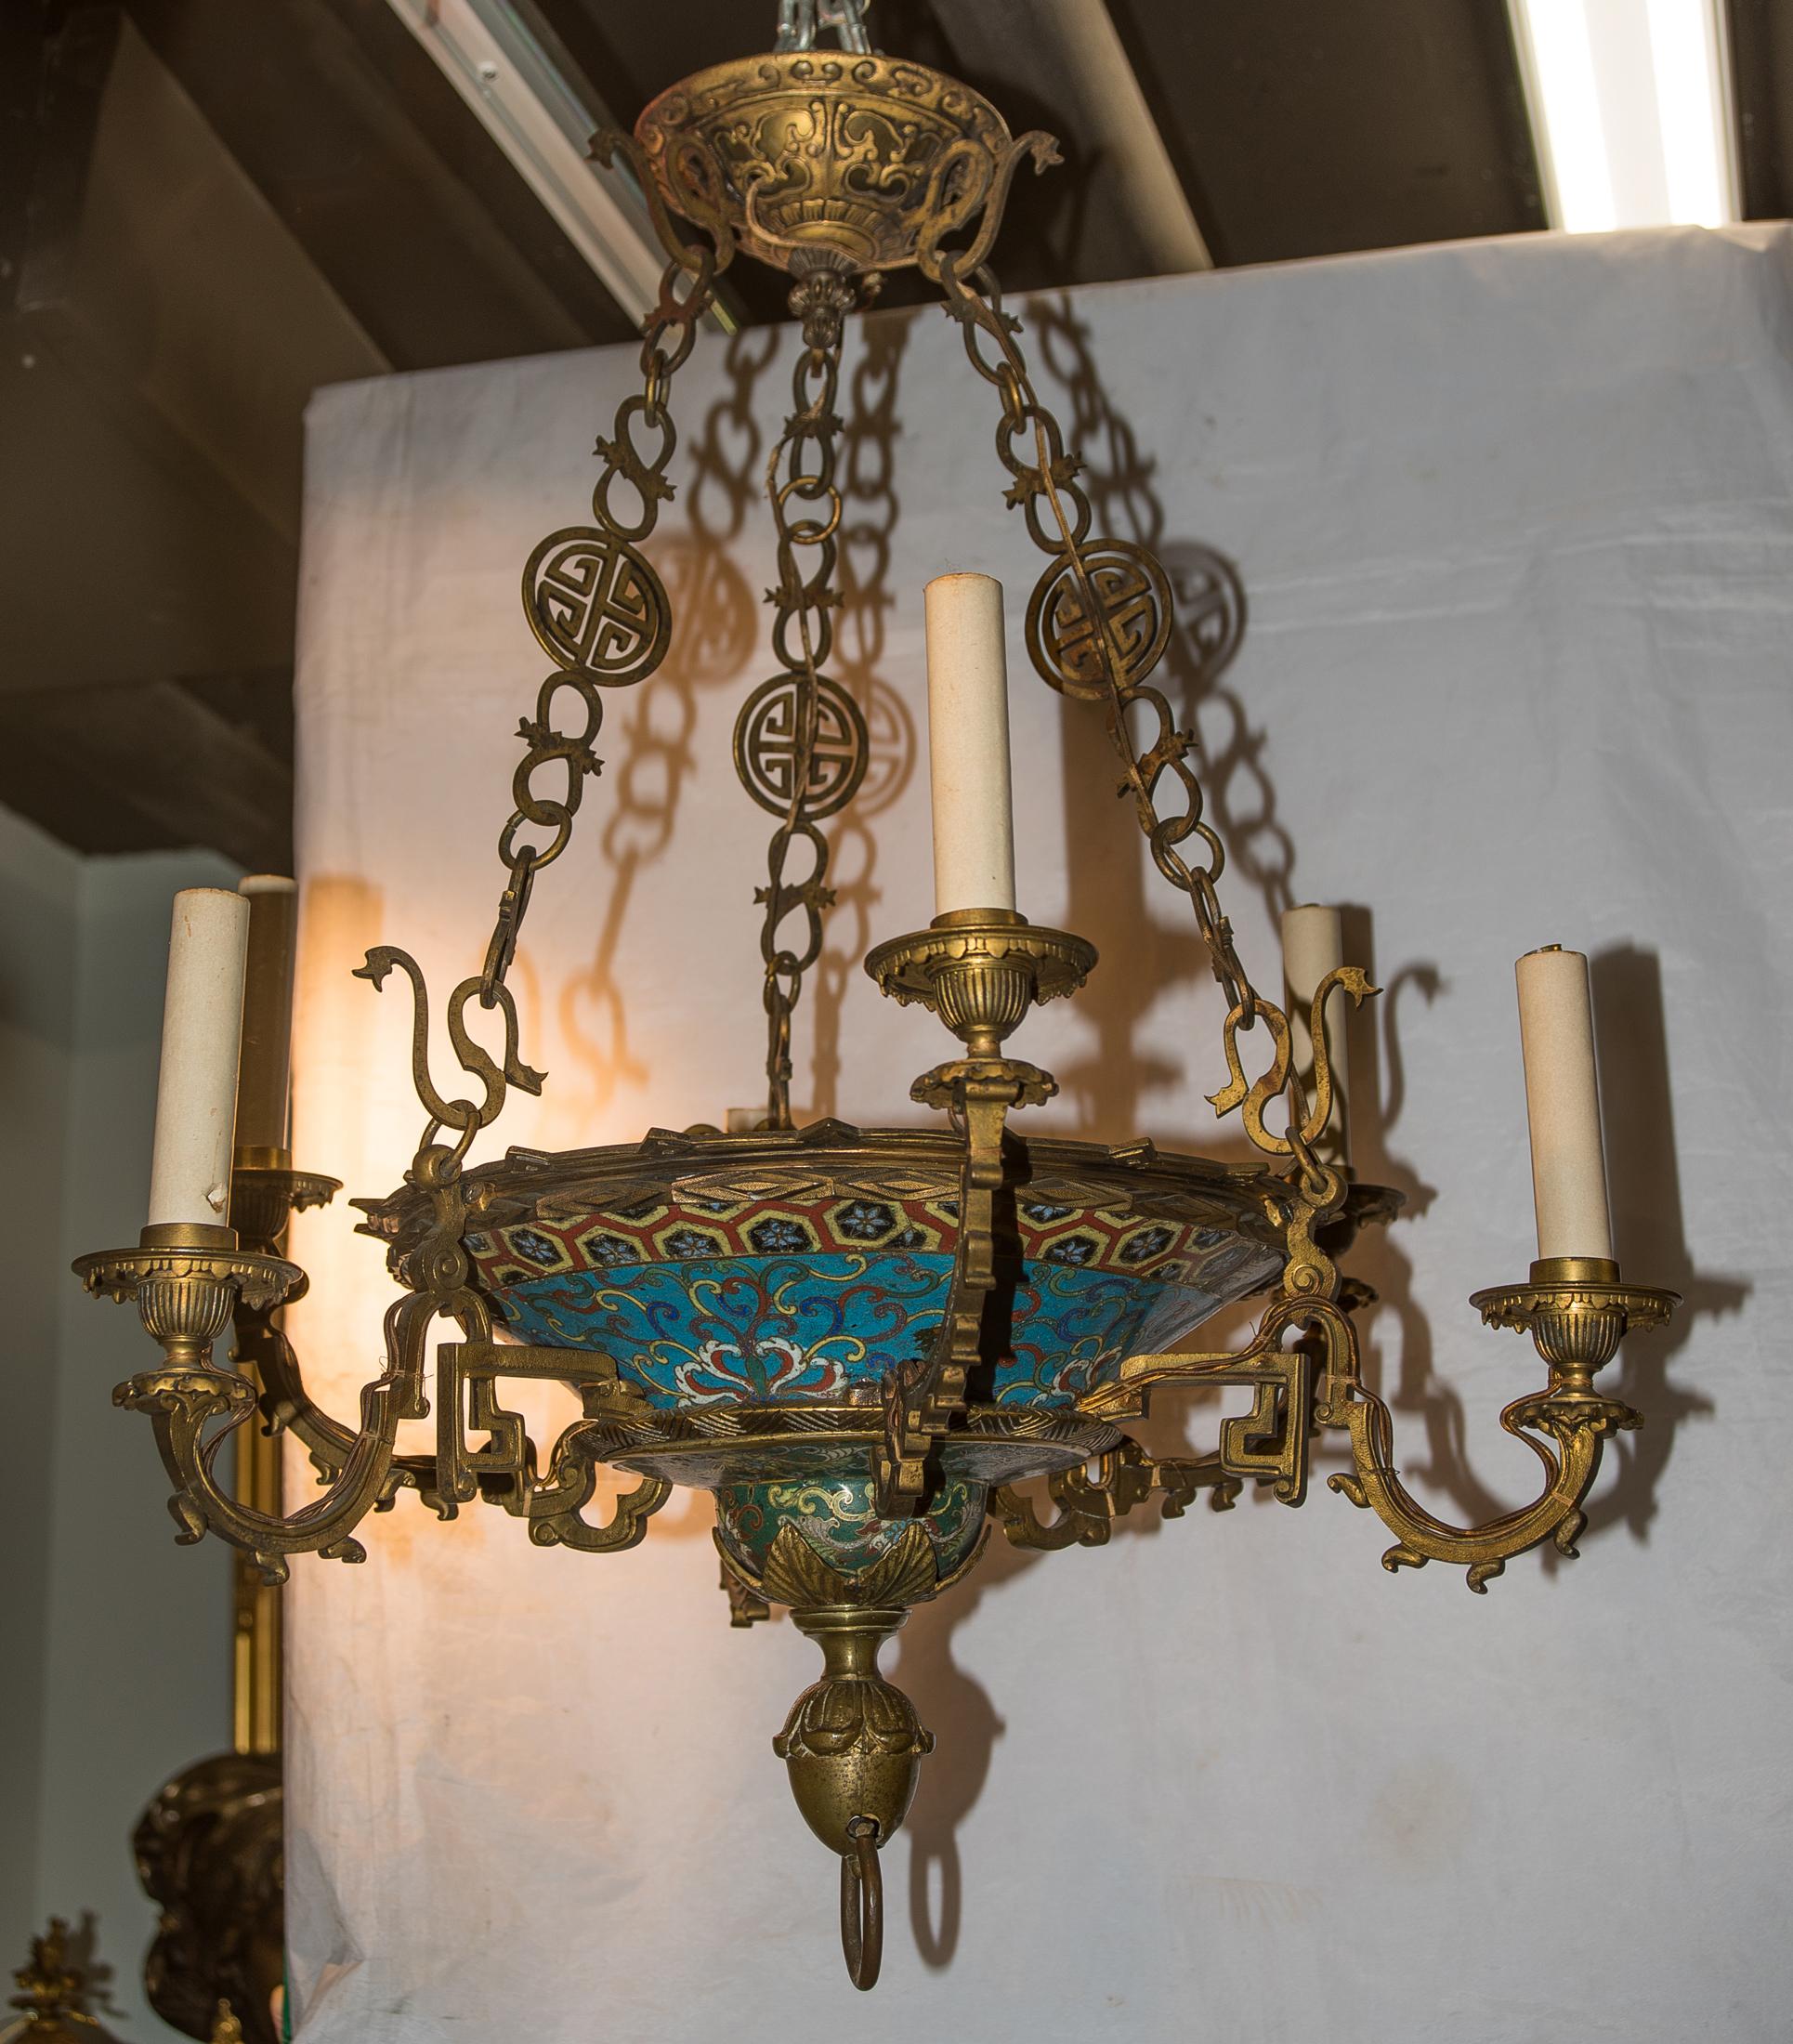 About

A rare and unusual French Japonisme gilt-bronze Champlevé enamel six-light chandelier attributed to E Lelièvre

Artist: Attributed to Eugene Lelièvre (1856-1945)
Date: 19th century
Origin: French
Dimension: 25 x 29 inches.